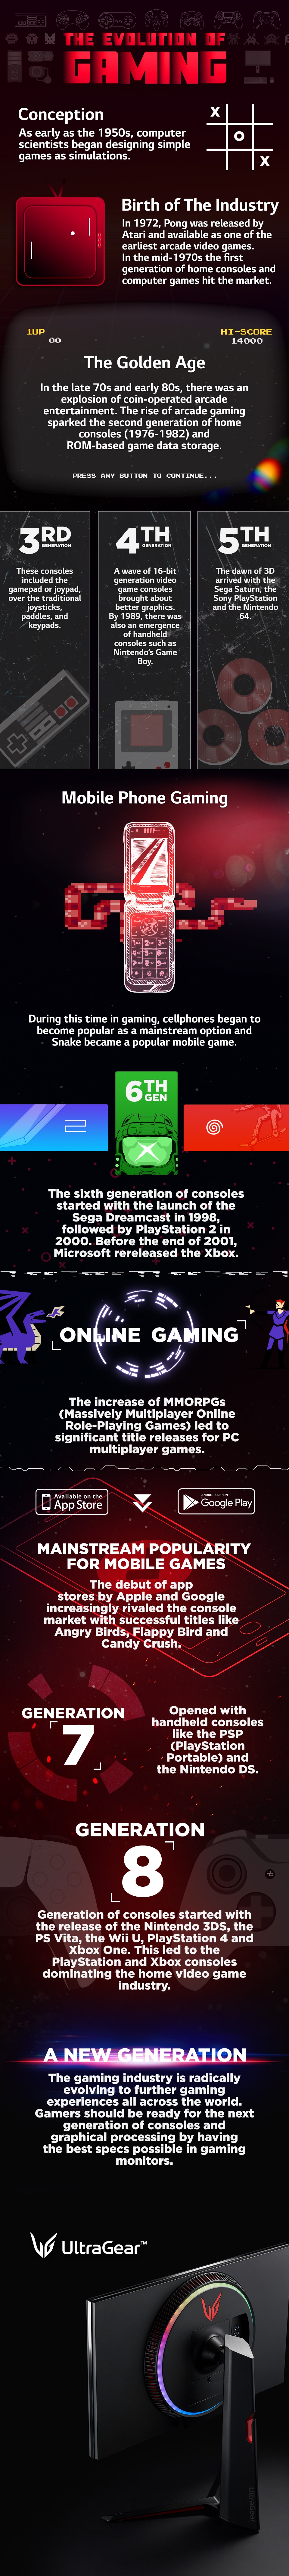 The History Of Gaming: An Evolving Community